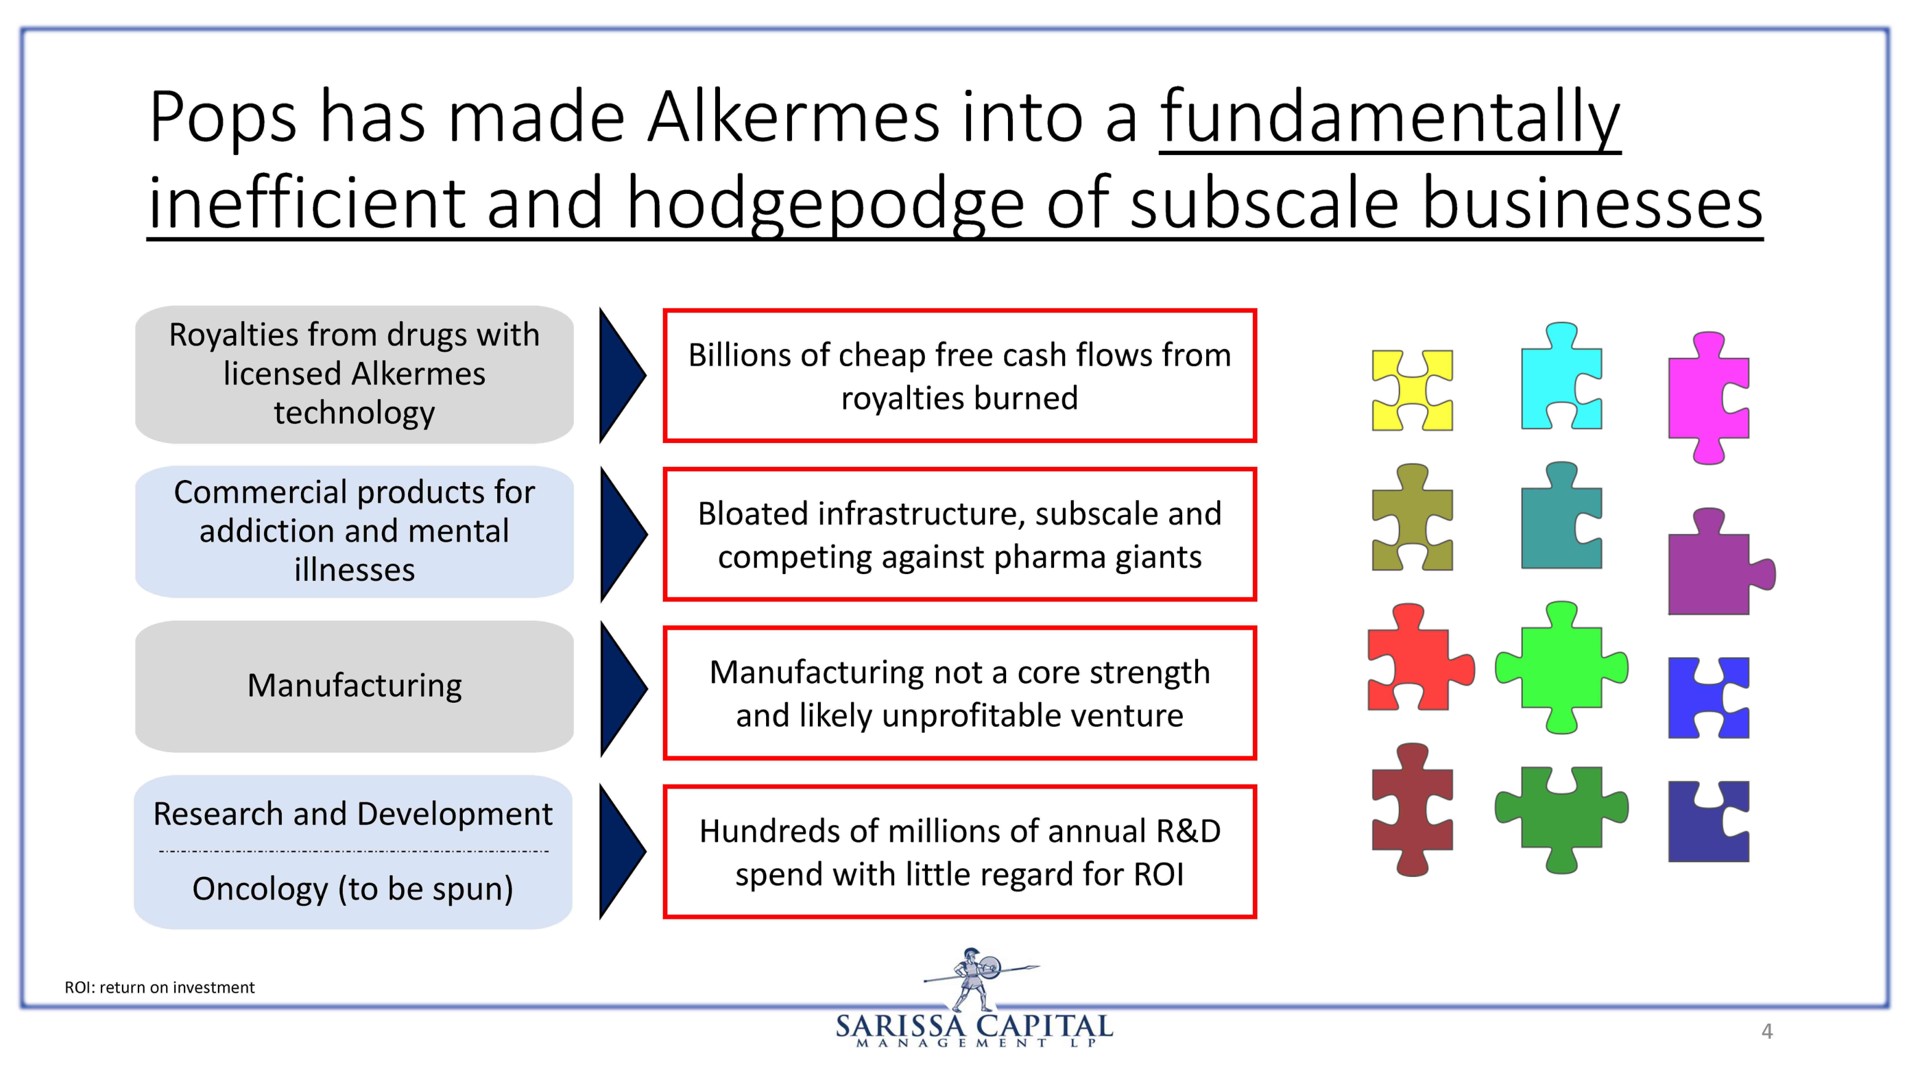 pops has made alkermes into a fundamentally inefficient and hodgepodge of businesses | Sarissa Capital